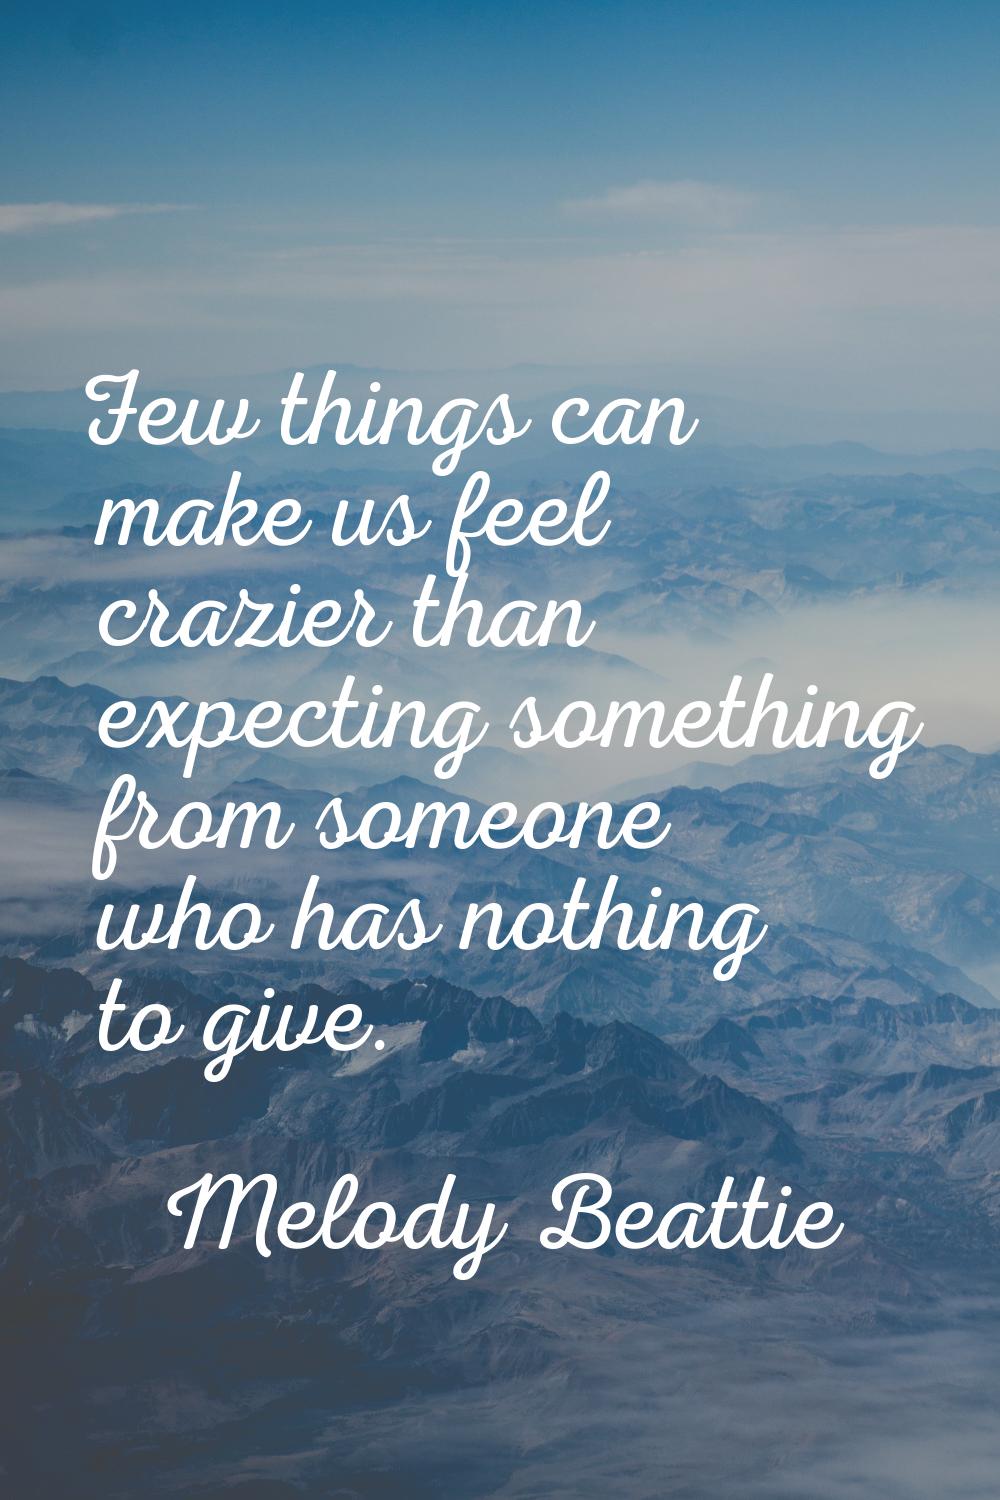 Few things can make us feel crazier than expecting something from someone who has nothing to give.